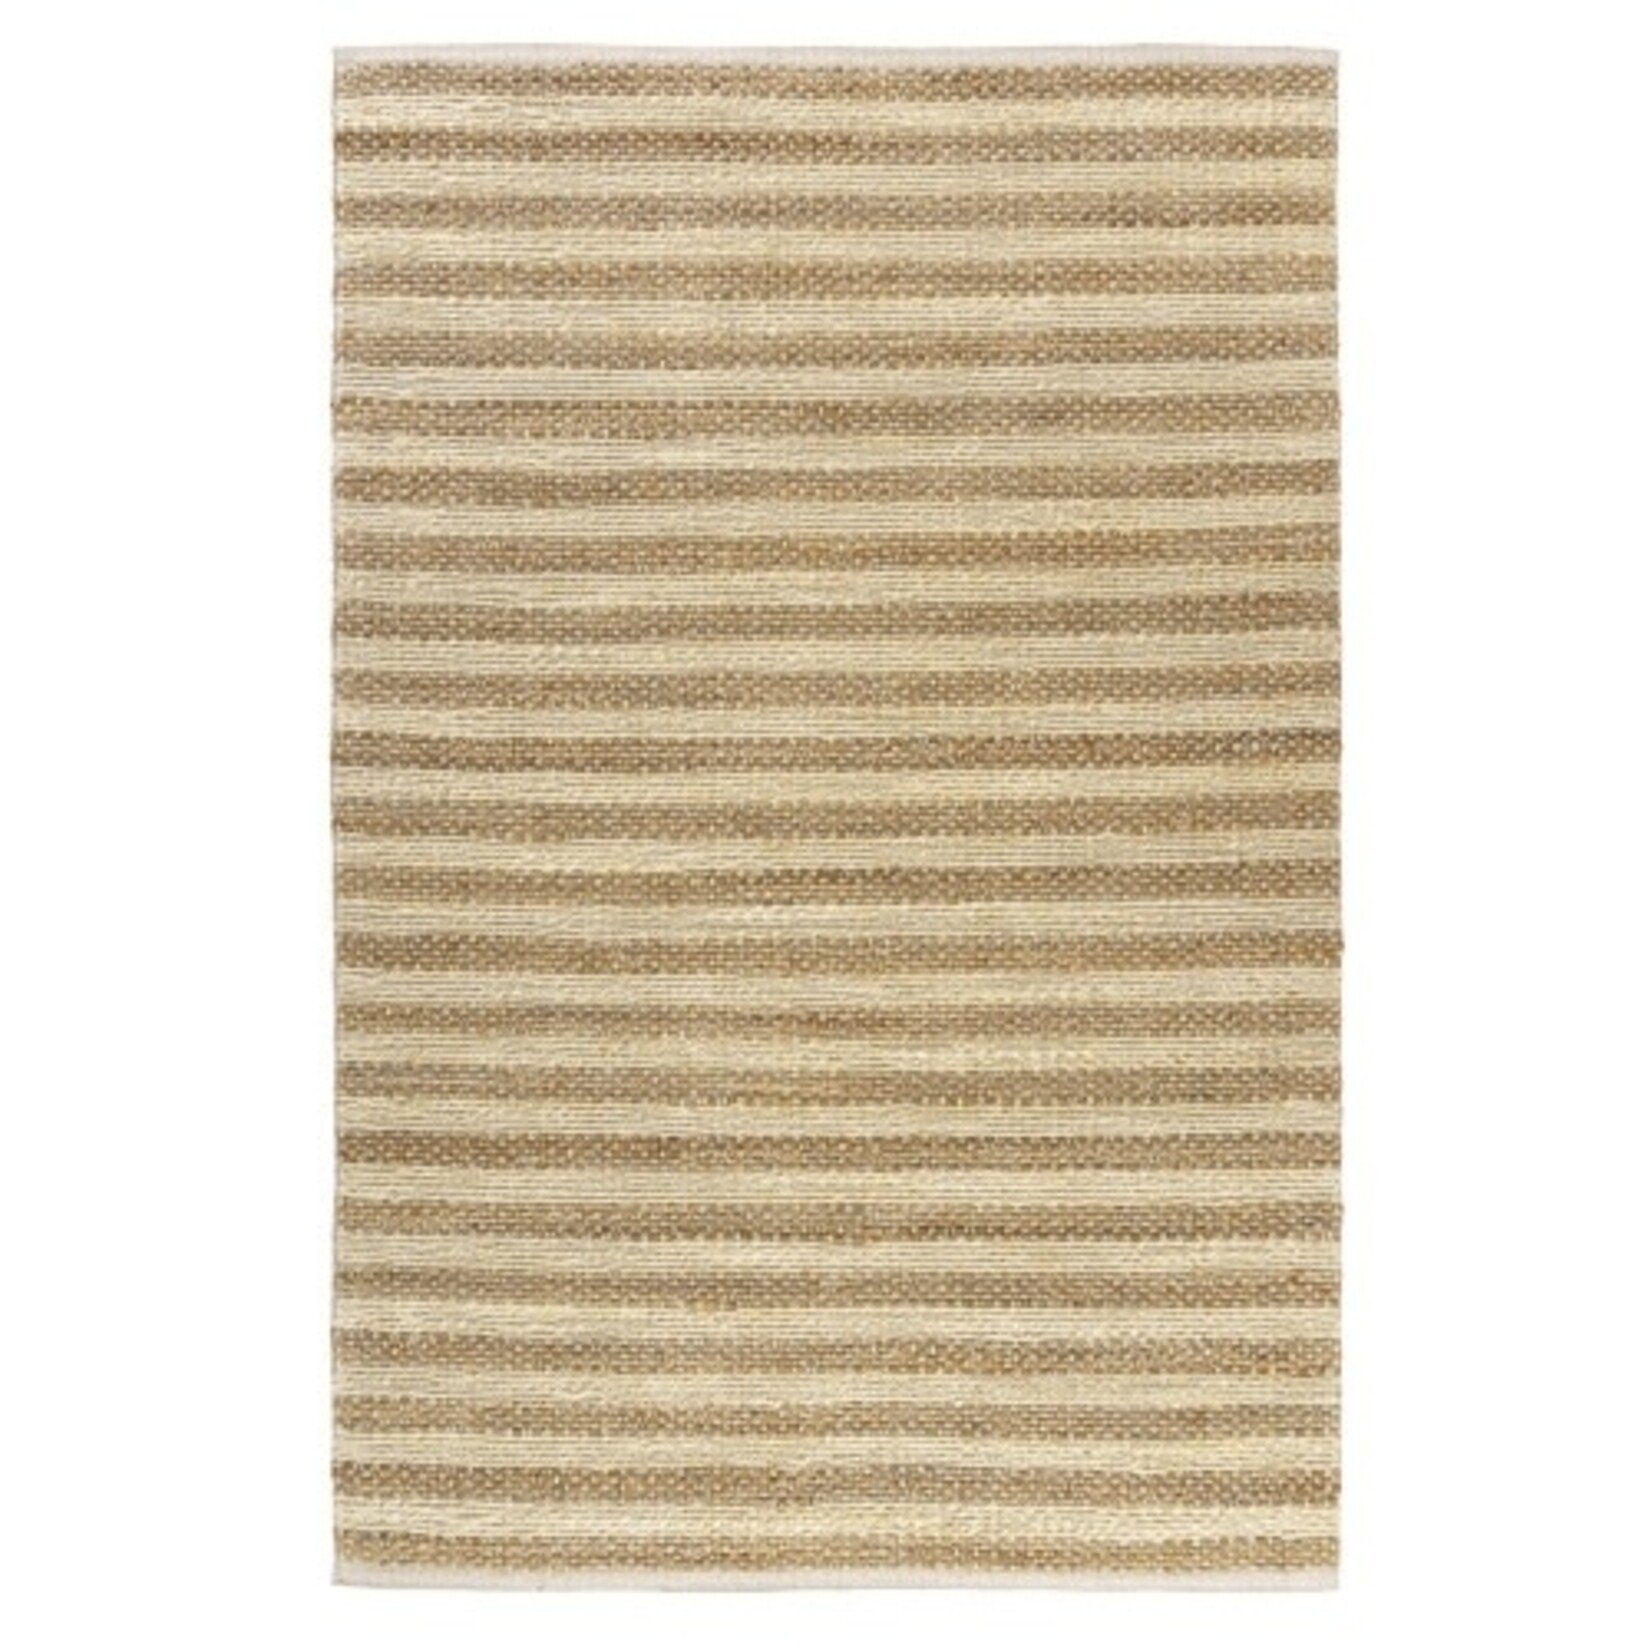 Outside The Box 7' 9" x 9' 9" Natural Fiber Jute / Cotton Blend Area Rug In Bright White - 82489